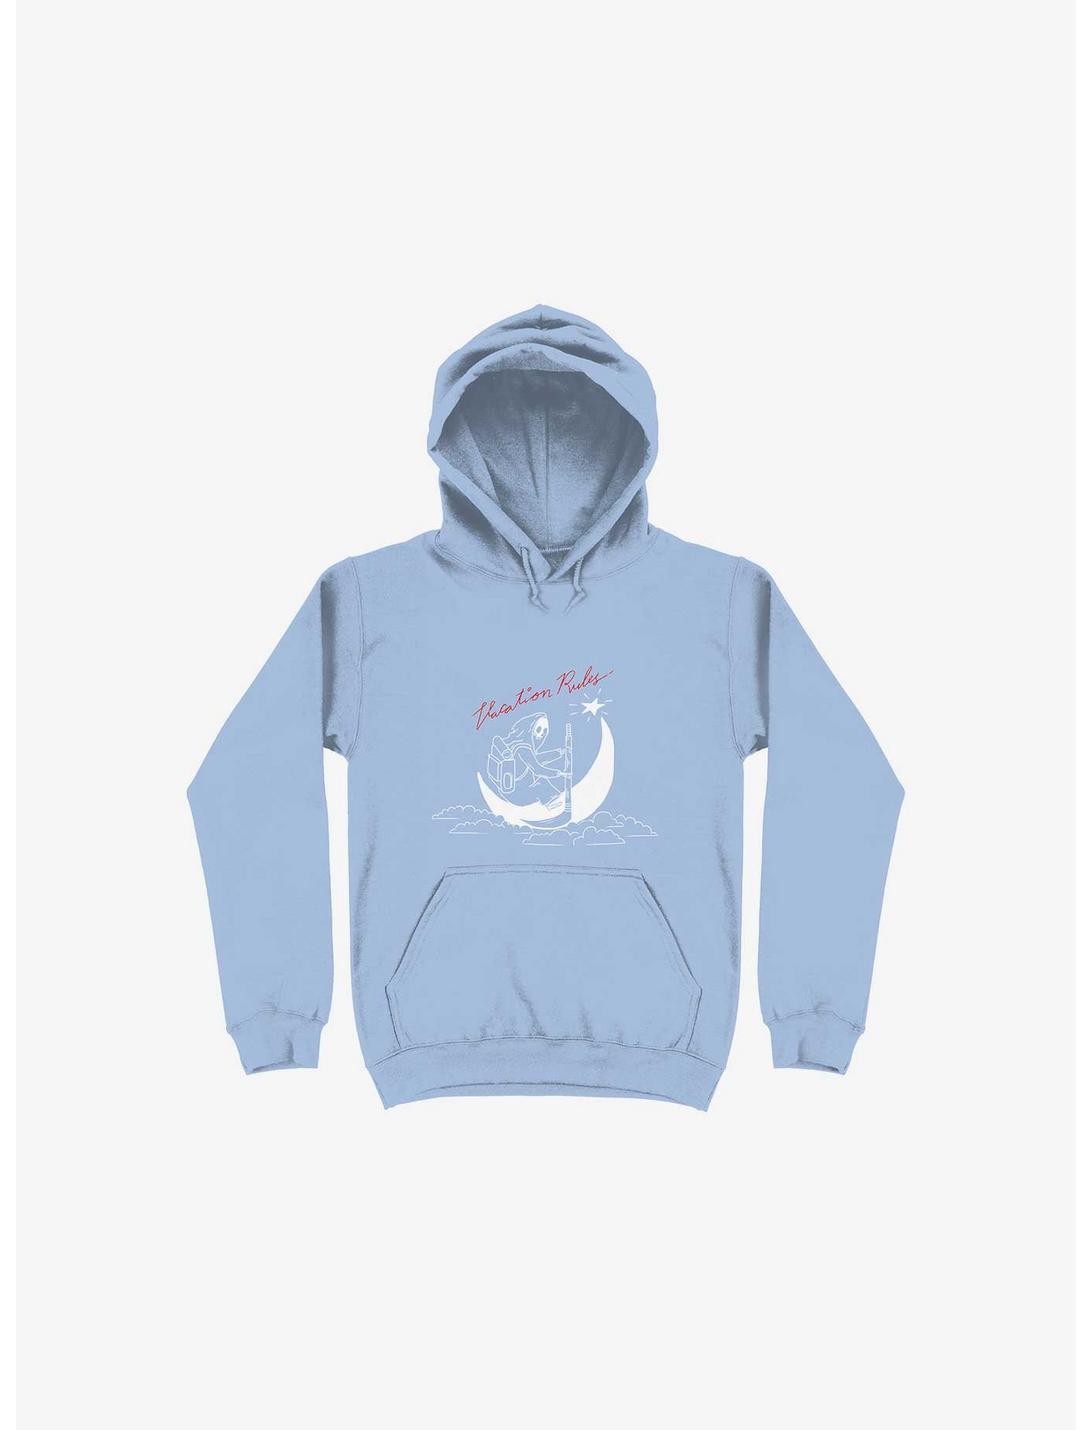 Vacation Rules Hoodie, LIGHT BLUE, hi-res